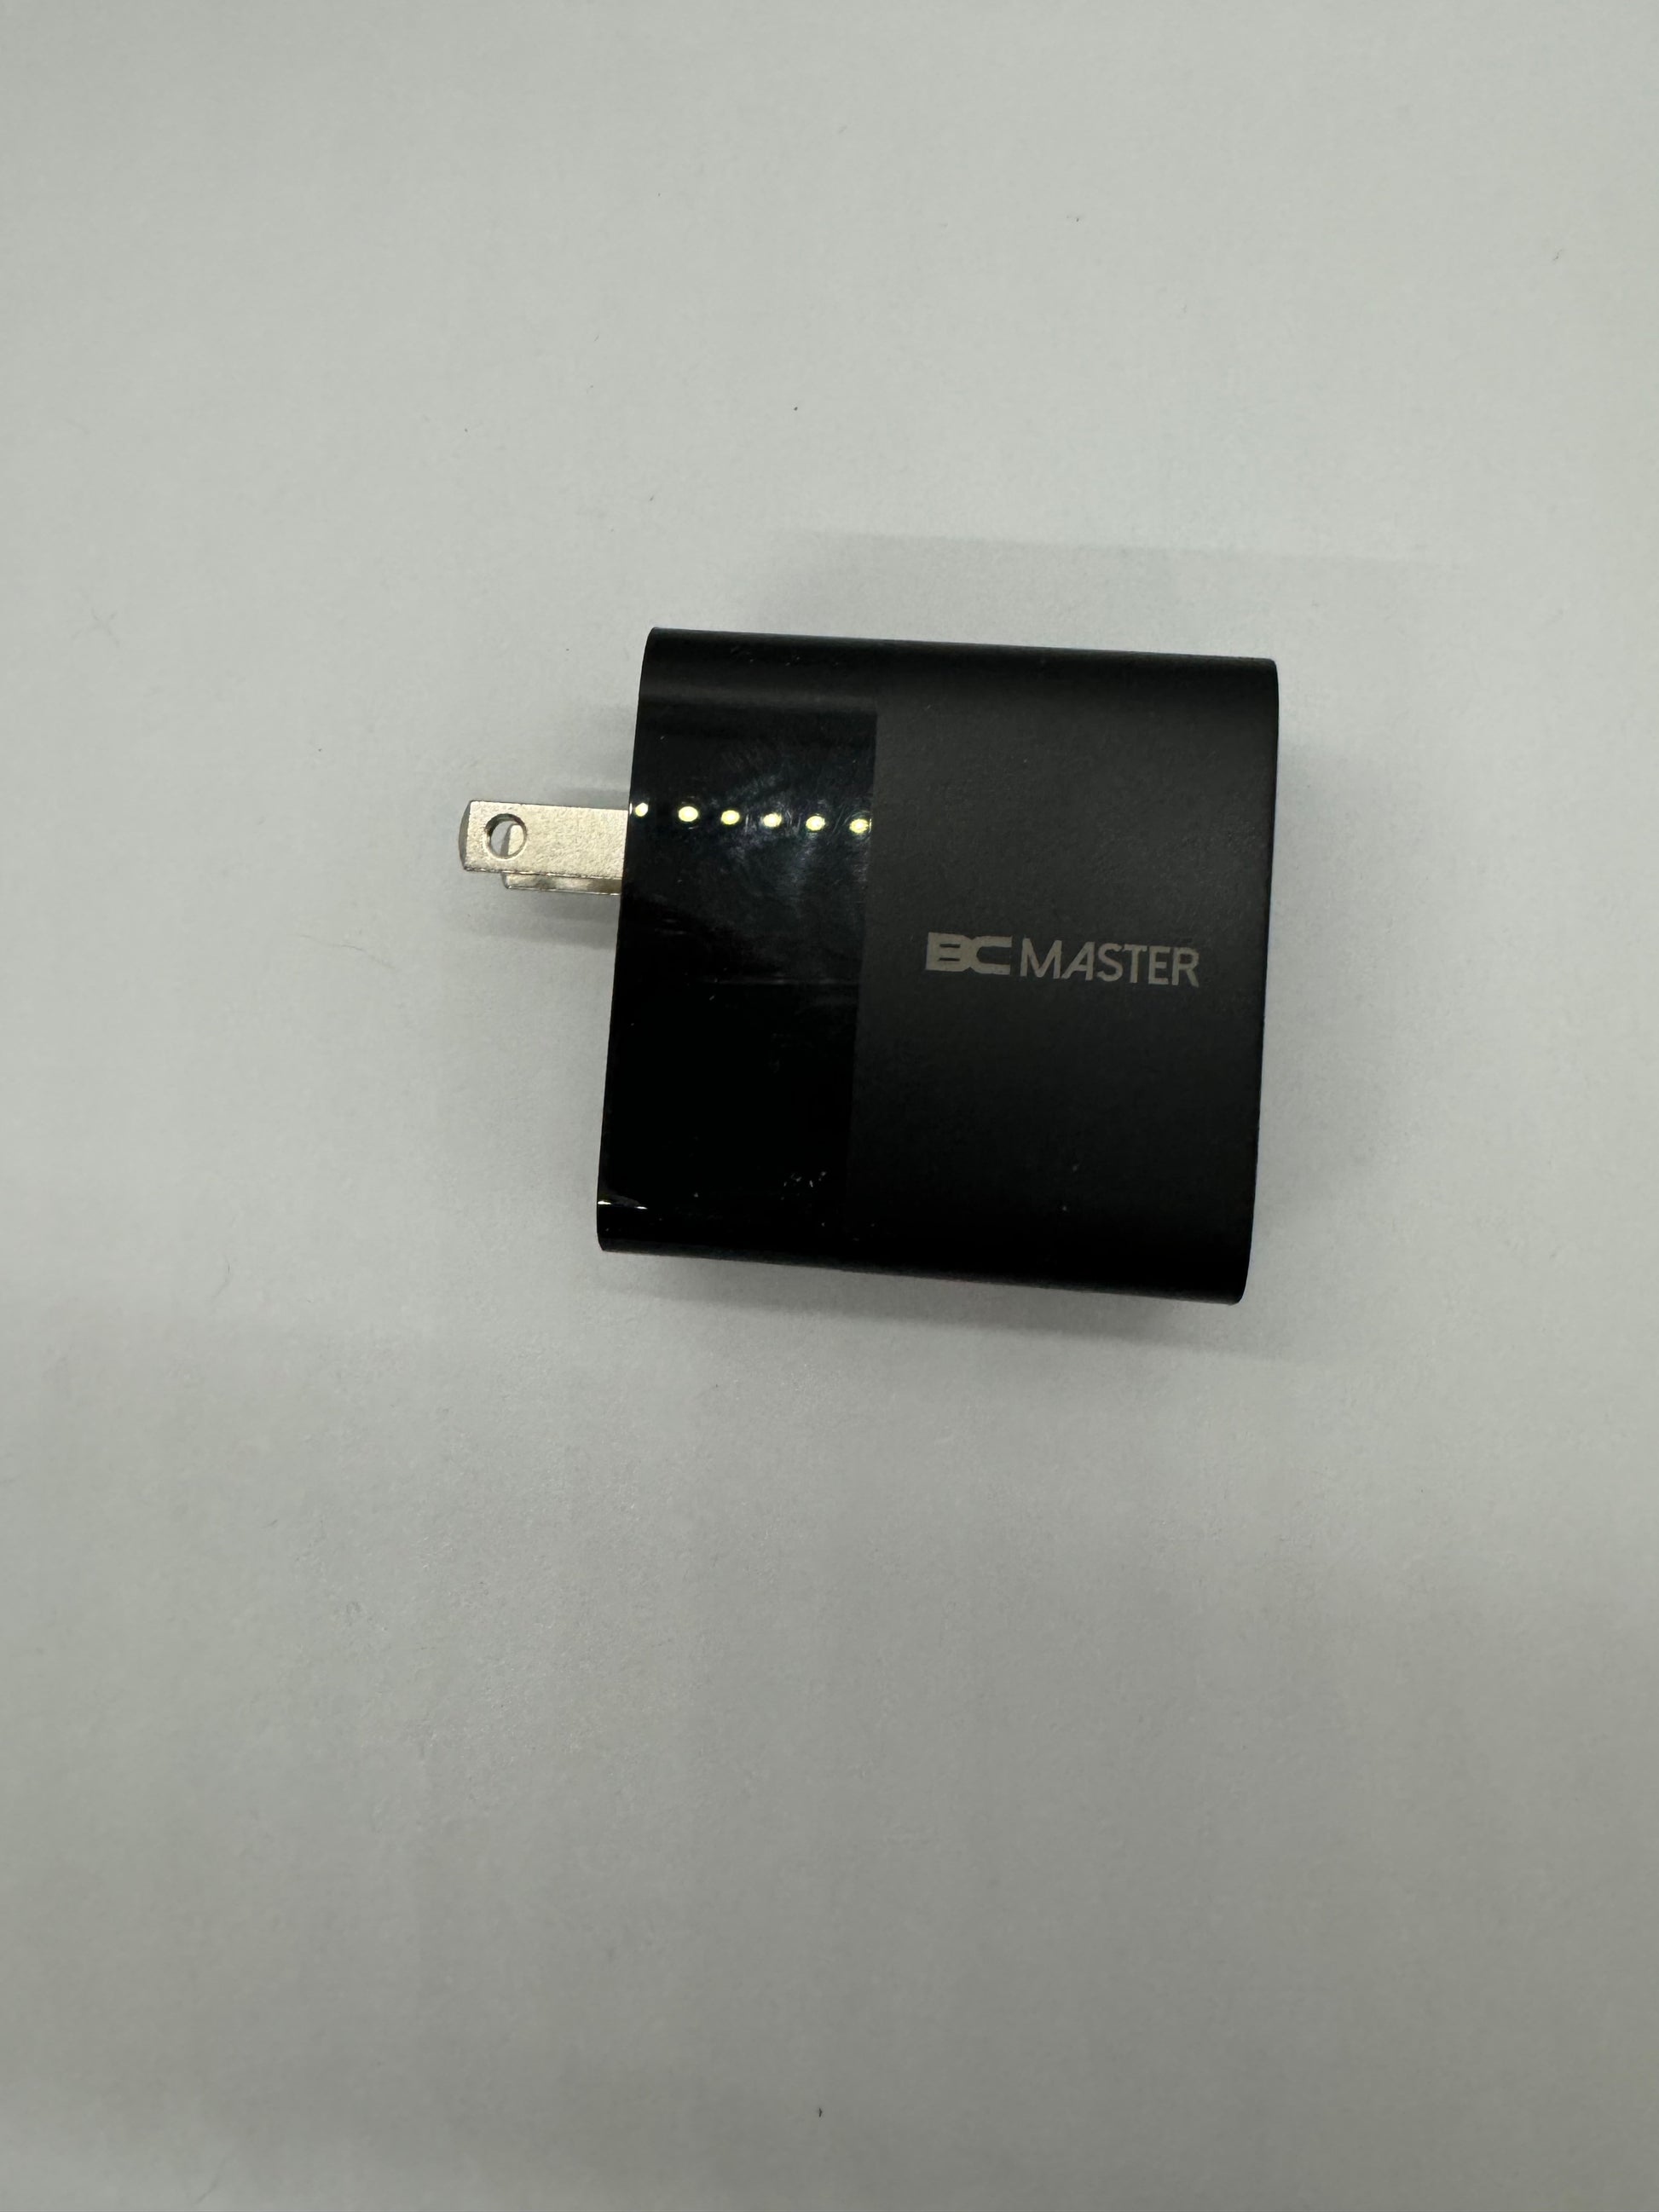 The picture shows a black rectangular adapter with a plug on one side. The plug is metallic and has two prongs for inserting into an electrical outlet. On the front side of the adapter, there is a series of small dots, possibly indicating some sort of display or indicator lights. The brand name "BC MASTER" is printed in white letters on the front side of the adapter. The background of the picture is a plain light-colored surface.